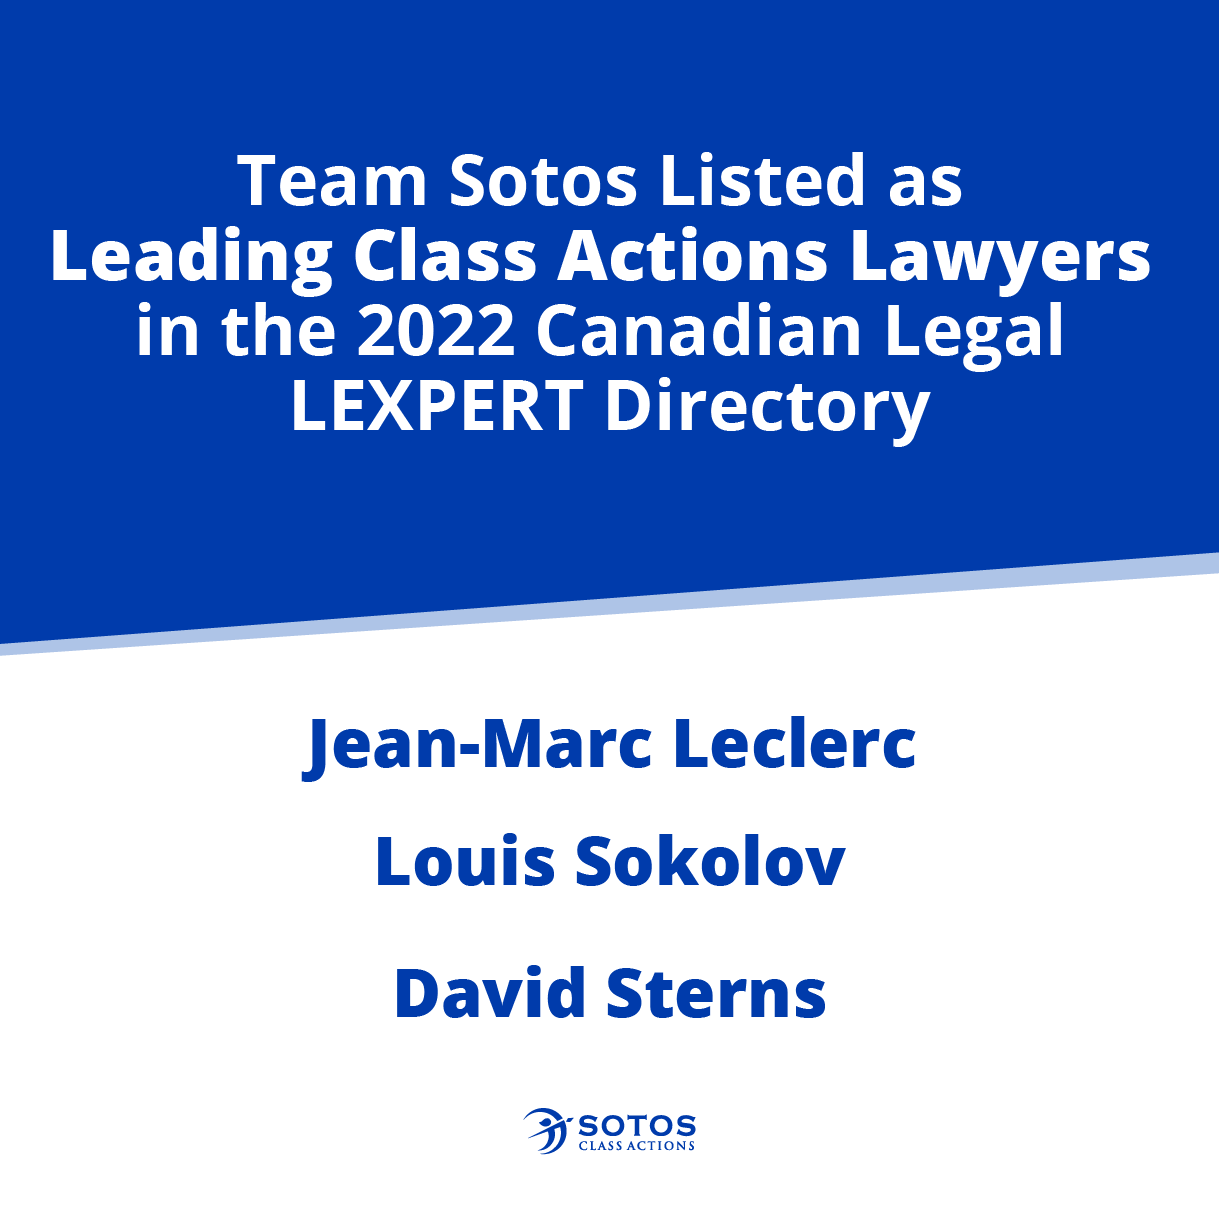 Team Sotos Listed as Leading Class Actions Lawyers in the 2022 Canadian